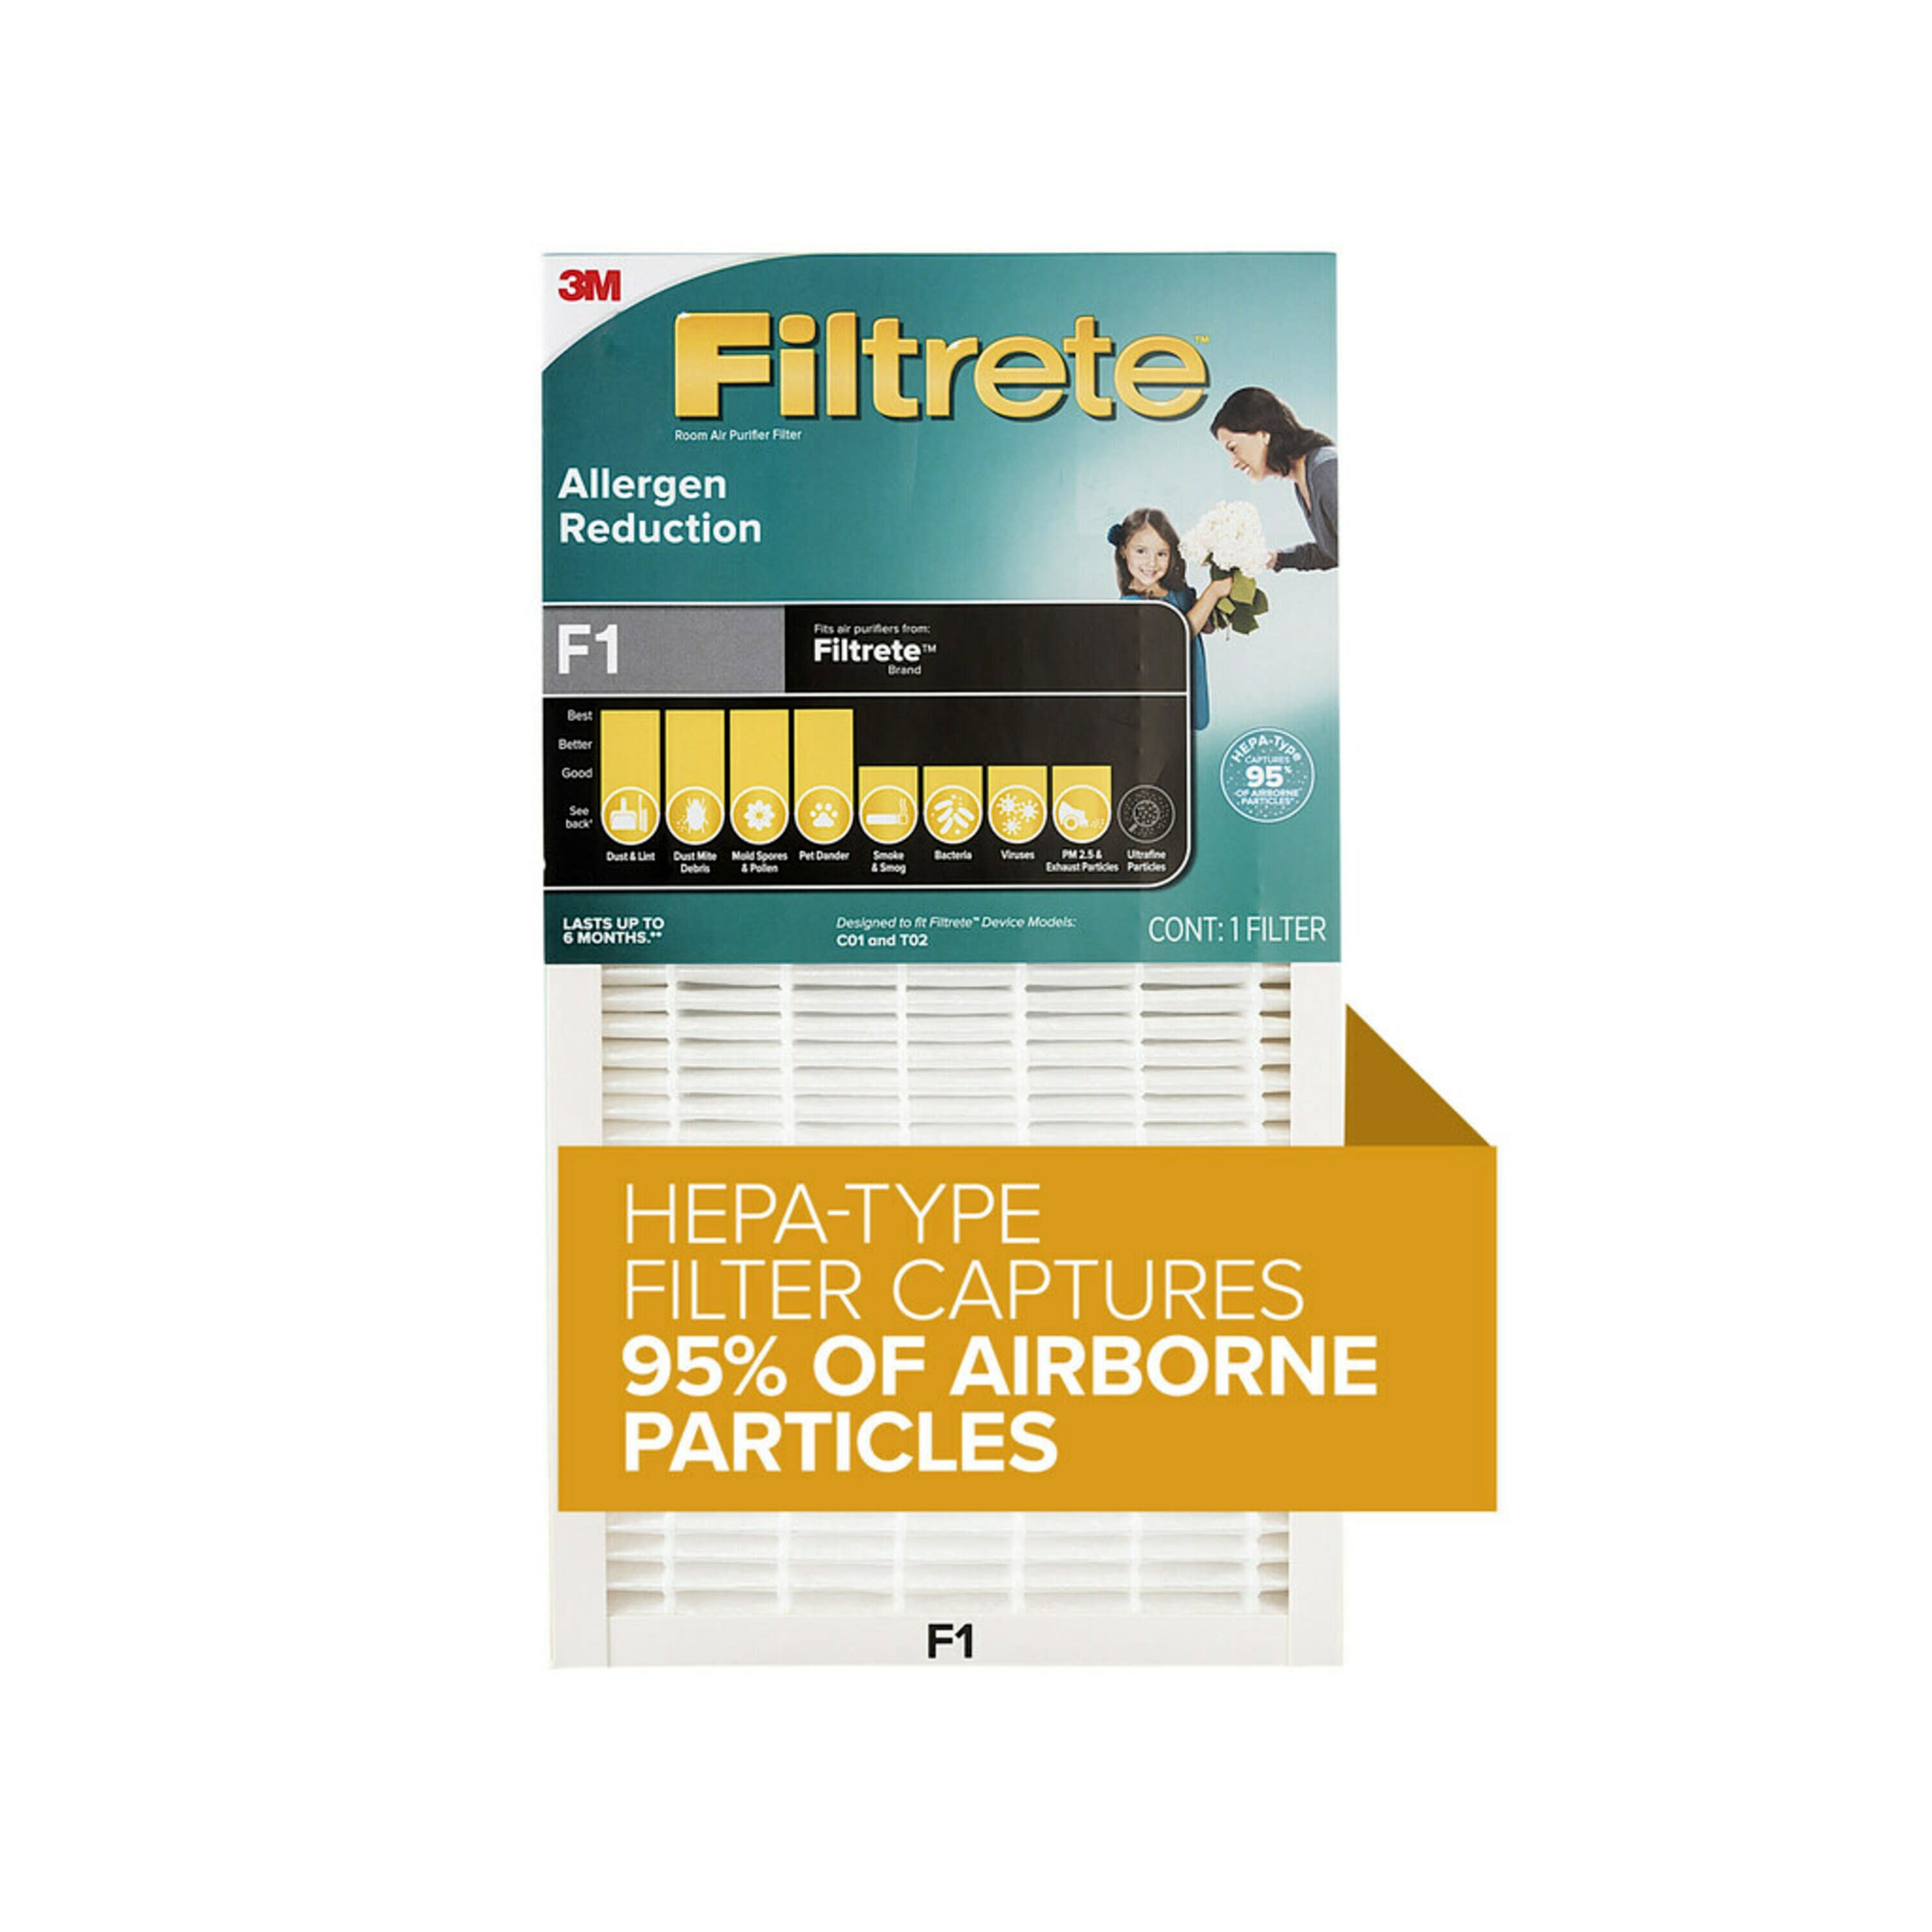 Filtrete by 3M Allergen Reduction HEPA-Type Air Purifier Filter, F1 - image 1 of 13